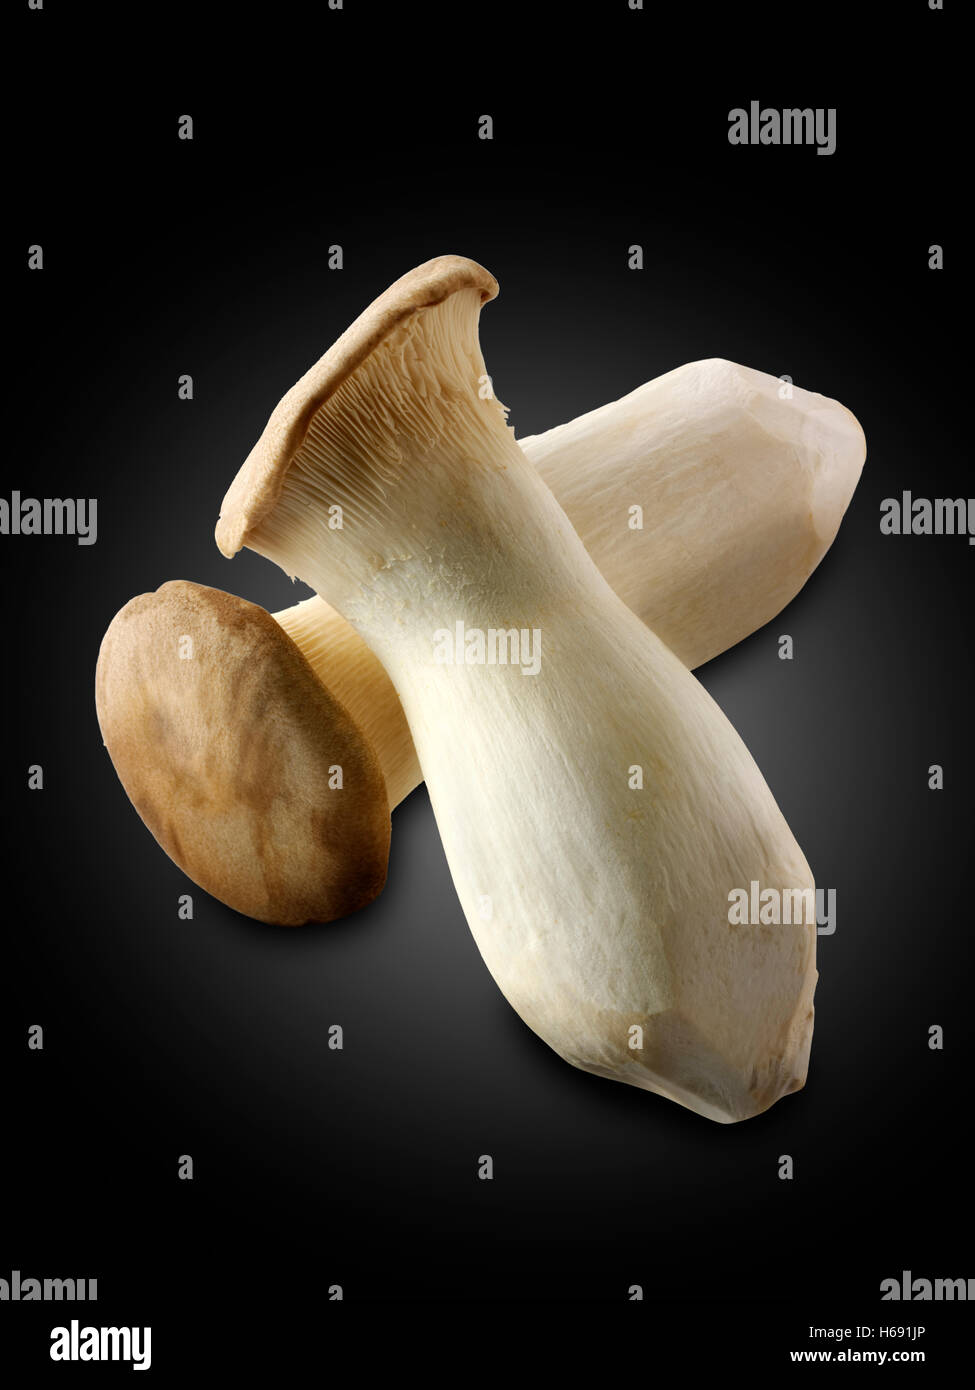 Straw Mushroom - Definition and Cooking Information 